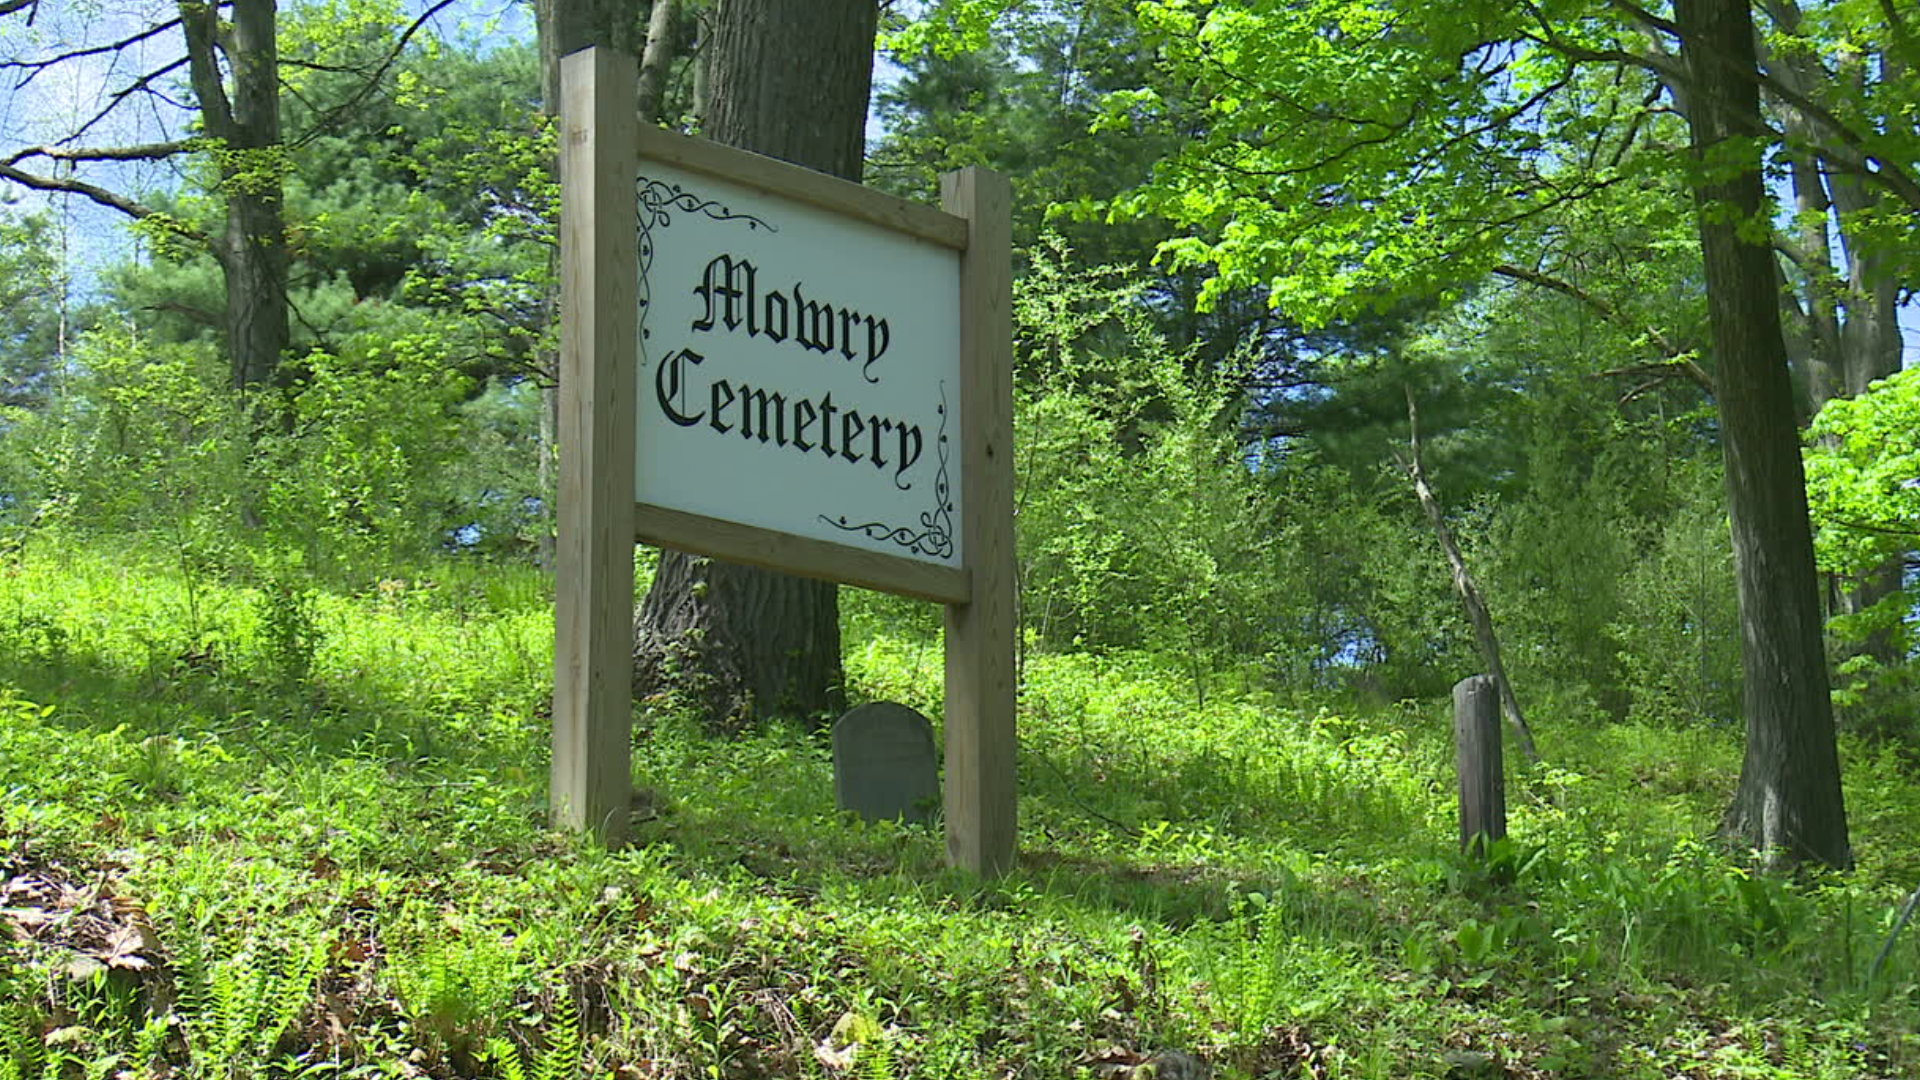 A woman from Wyoming County is spending practically every night cleaning up a cemetery near her home. It's a final resting place for dozens of veterans.